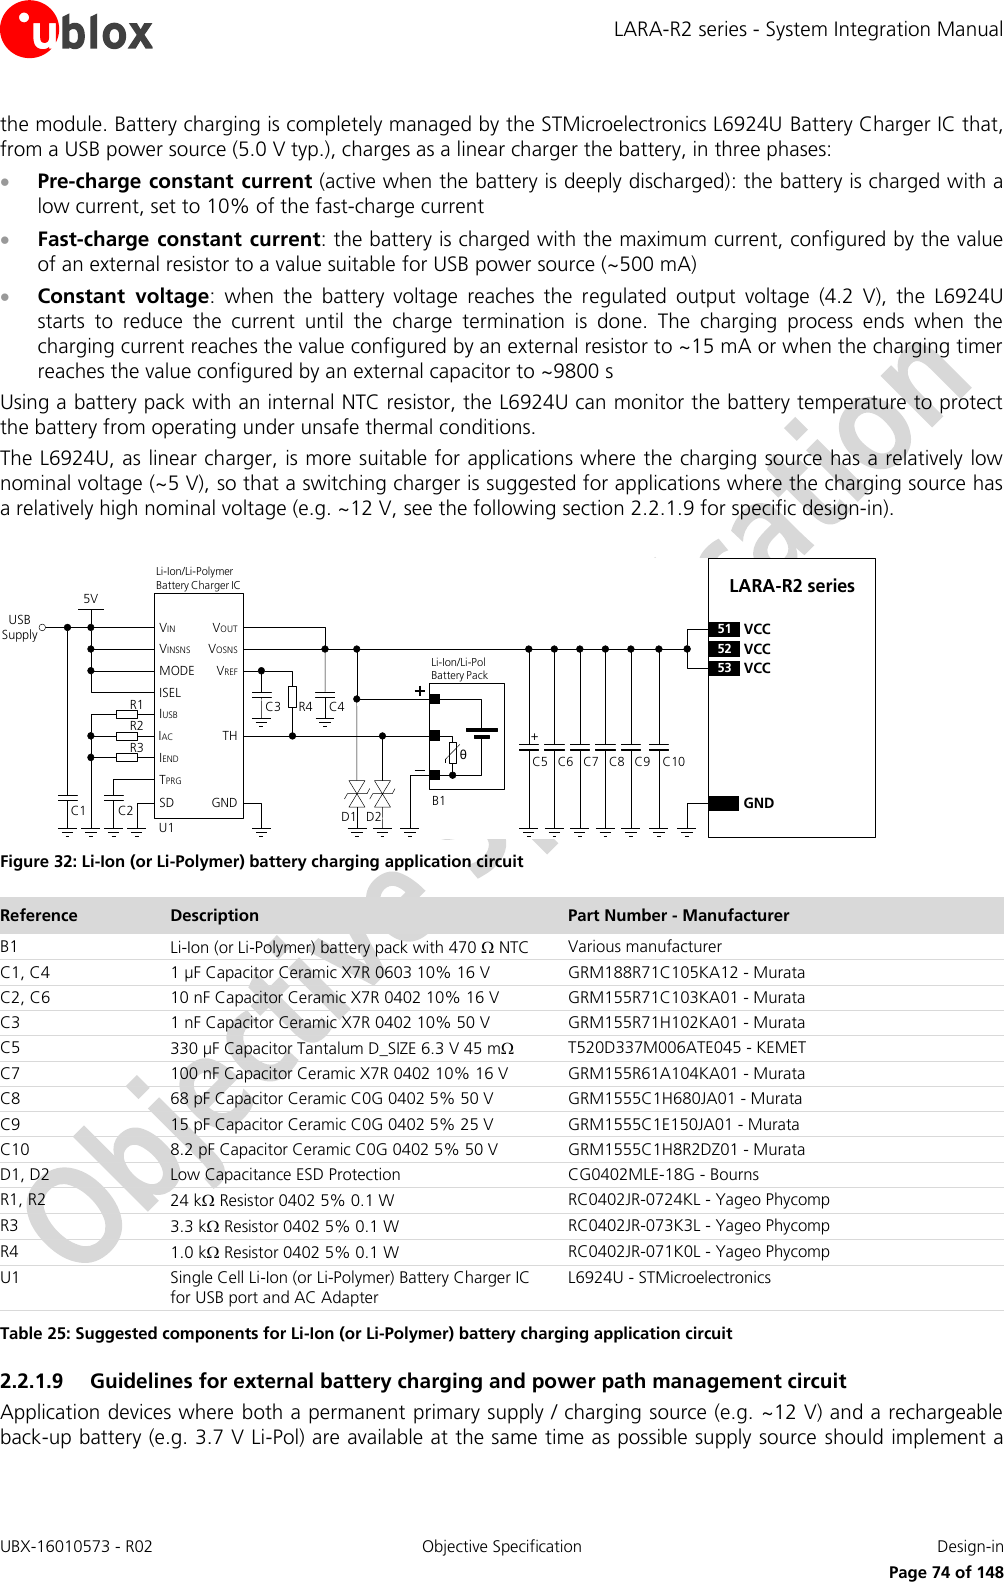 LARA-R2 series - System Integration Manual UBX-16010573 - R02  Objective Specification  Design-in     Page 74 of 148 the module. Battery charging is completely managed by the STMicroelectronics L6924U Battery Charger IC that, from a USB power source (5.0 V typ.), charges as a linear charger the battery, in three phases:  Pre-charge constant current (active when the battery is deeply discharged): the battery is charged with a low current, set to 10% of the fast-charge current  Fast-charge constant  current: the battery is charged with the maximum current, configured by the value of an external resistor to a value suitable for USB power source (~500 mA)  Constant  voltage:  when  the  battery  voltage  reaches  the  regulated  output  voltage  (4.2  V),  the  L6924U starts  to  reduce  the  current  until  the  charge  termination  is  done.  The  charging  process  ends  when  the charging current reaches the value configured by an external resistor to ~15 mA or when the charging timer reaches the value configured by an external capacitor to ~9800 s Using a battery pack with an internal NTC resistor, the L6924U can monitor the battery temperature to protect the battery from operating under unsafe thermal conditions. The L6924U, as linear charger, is more suitable for applications where the charging source has a relatively low nominal voltage (~5 V), so that a switching charger is suggested for applications where the charging source has a relatively high nominal voltage (e.g. ~12 V, see the following section 2.2.1.9 for specific design-in).  C5 C8GNDC7C6 C9LARA-R2 series52 VCC53 VCC51 VCC+USB SupplyC3 R4θU1IUSBIACIENDTPRGSDVINVINSNSMODEISELC2C15VTHGNDVOUTVOSNSVREFR1R2R3Li-Ion/Li-Pol Battery PackD1B1C4Li-Ion/Li-Polymer    Battery Charger ICD2C10 Figure 32: Li-Ion (or Li-Polymer) battery charging application circuit Reference Description Part Number - Manufacturer B1 Li-Ion (or Li-Polymer) battery pack with 470  NTC Various manufacturer C1, C4 1 µF Capacitor Ceramic X7R 0603 10% 16 V GRM188R71C105KA12 - Murata C2, C6 10 nF Capacitor Ceramic X7R 0402 10% 16 V GRM155R71C103KA01 - Murata C3 1 nF Capacitor Ceramic X7R 0402 10% 50 V GRM155R71H102KA01 - Murata C5 330 µF Capacitor Tantalum D_SIZE 6.3 V 45 m T520D337M006ATE045 - KEMET C7 100 nF Capacitor Ceramic X7R 0402 10% 16 V GRM155R61A104KA01 - Murata C8 68 pF Capacitor Ceramic C0G 0402 5% 50 V GRM1555C1H680JA01 - Murata C9 15 pF Capacitor Ceramic C0G 0402 5% 25 V  GRM1555C1E150JA01 - Murata C10 8.2 pF Capacitor Ceramic C0G 0402 5% 50 V GRM1555C1H8R2DZ01 - Murata D1, D2 Low Capacitance ESD Protection CG0402MLE-18G - Bourns R1, R2 24 k Resistor 0402 5% 0.1 W RC0402JR-0724KL - Yageo Phycomp R3 3.3 k Resistor 0402 5% 0.1 W RC0402JR-073K3L - Yageo Phycomp R4 1.0 k Resistor 0402 5% 0.1 W RC0402JR-071K0L - Yageo Phycomp U1 Single Cell Li-Ion (or Li-Polymer) Battery Charger IC for USB port and AC Adapter L6924U - STMicroelectronics Table 25: Suggested components for Li-Ion (or Li-Polymer) battery charging application circuit 2.2.1.9 Guidelines for external battery charging and power path management circuit Application devices where both a permanent primary supply / charging source (e.g. ~12 V) and a rechargeable back-up battery (e.g. 3.7 V Li-Pol) are available at the same time as possible supply source should implement a 